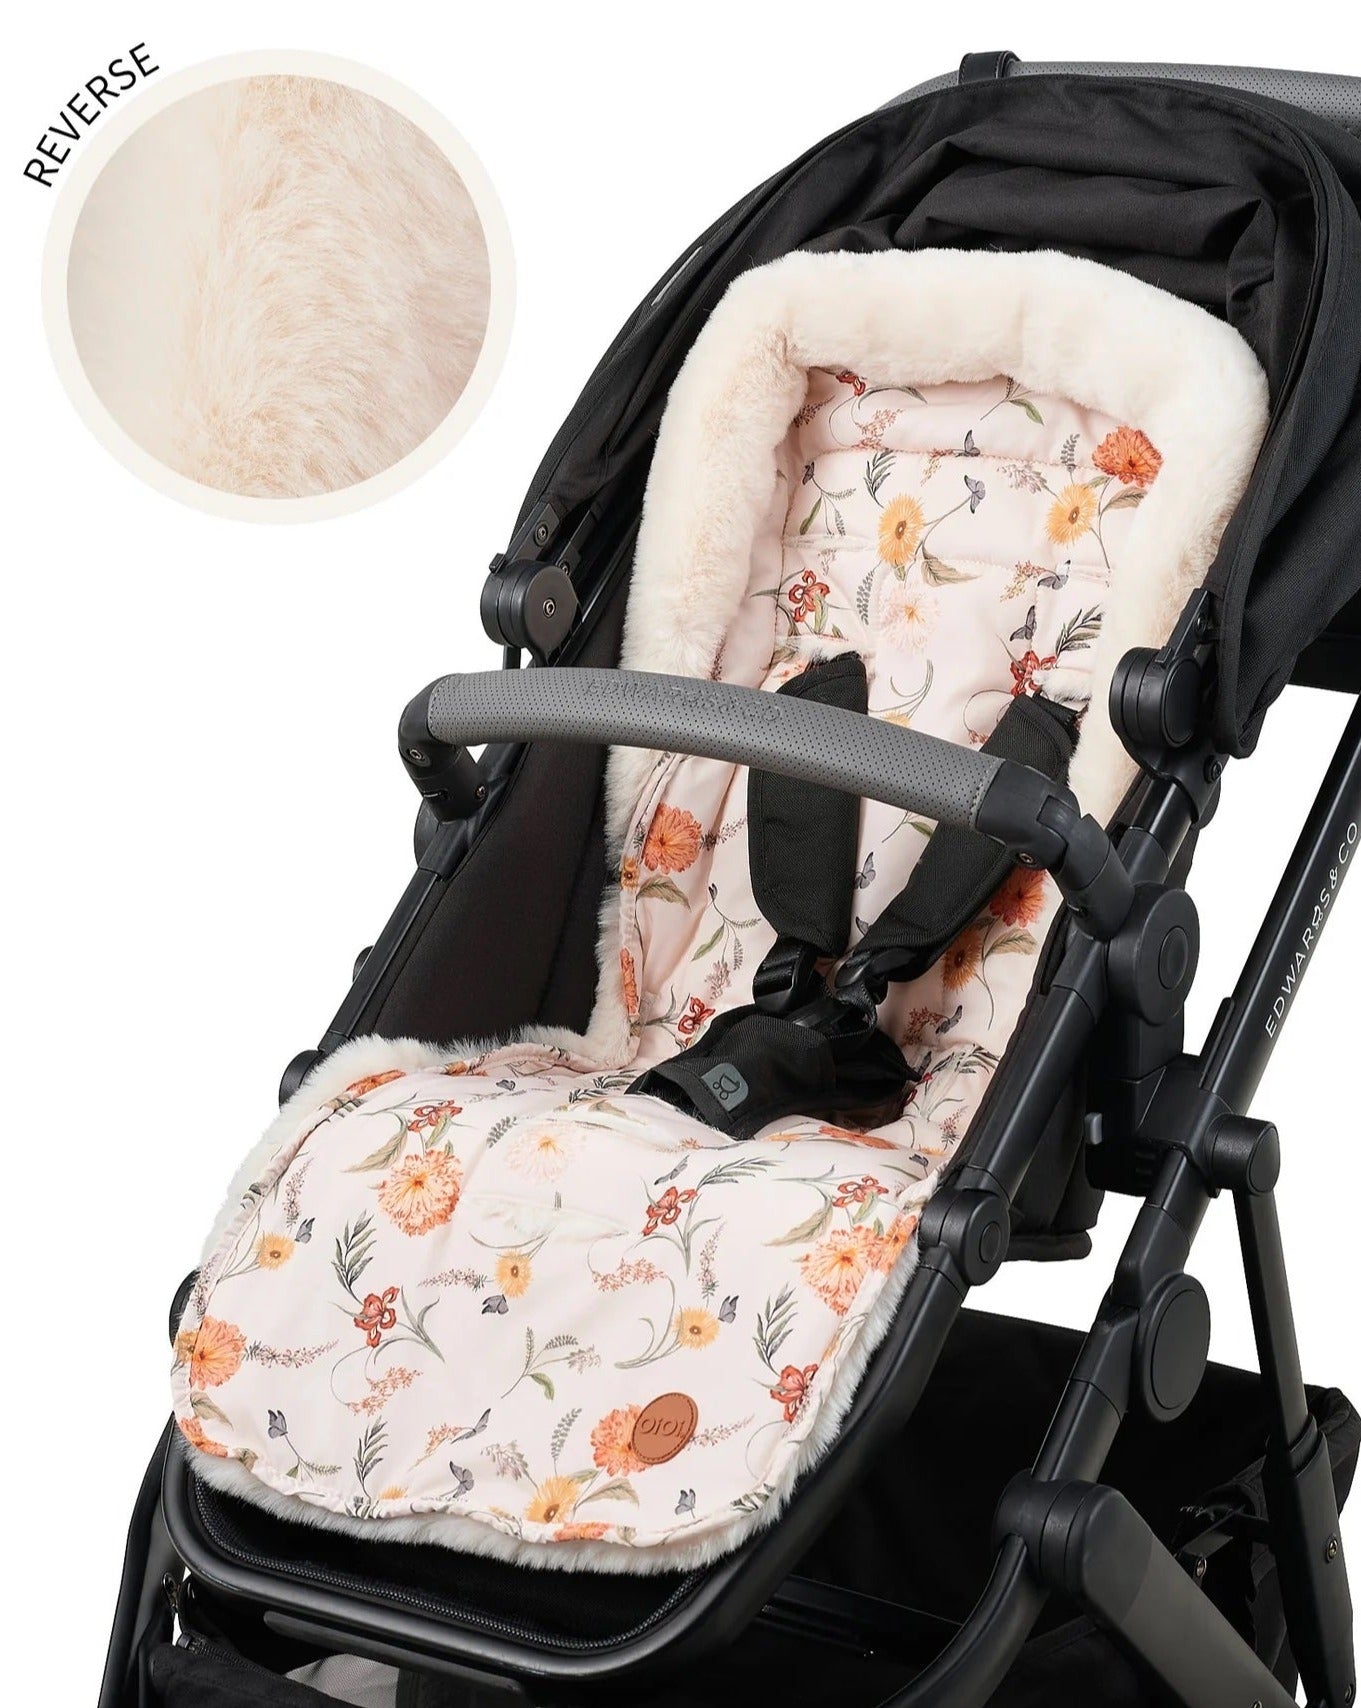 oioi pram liner - angus and dudley